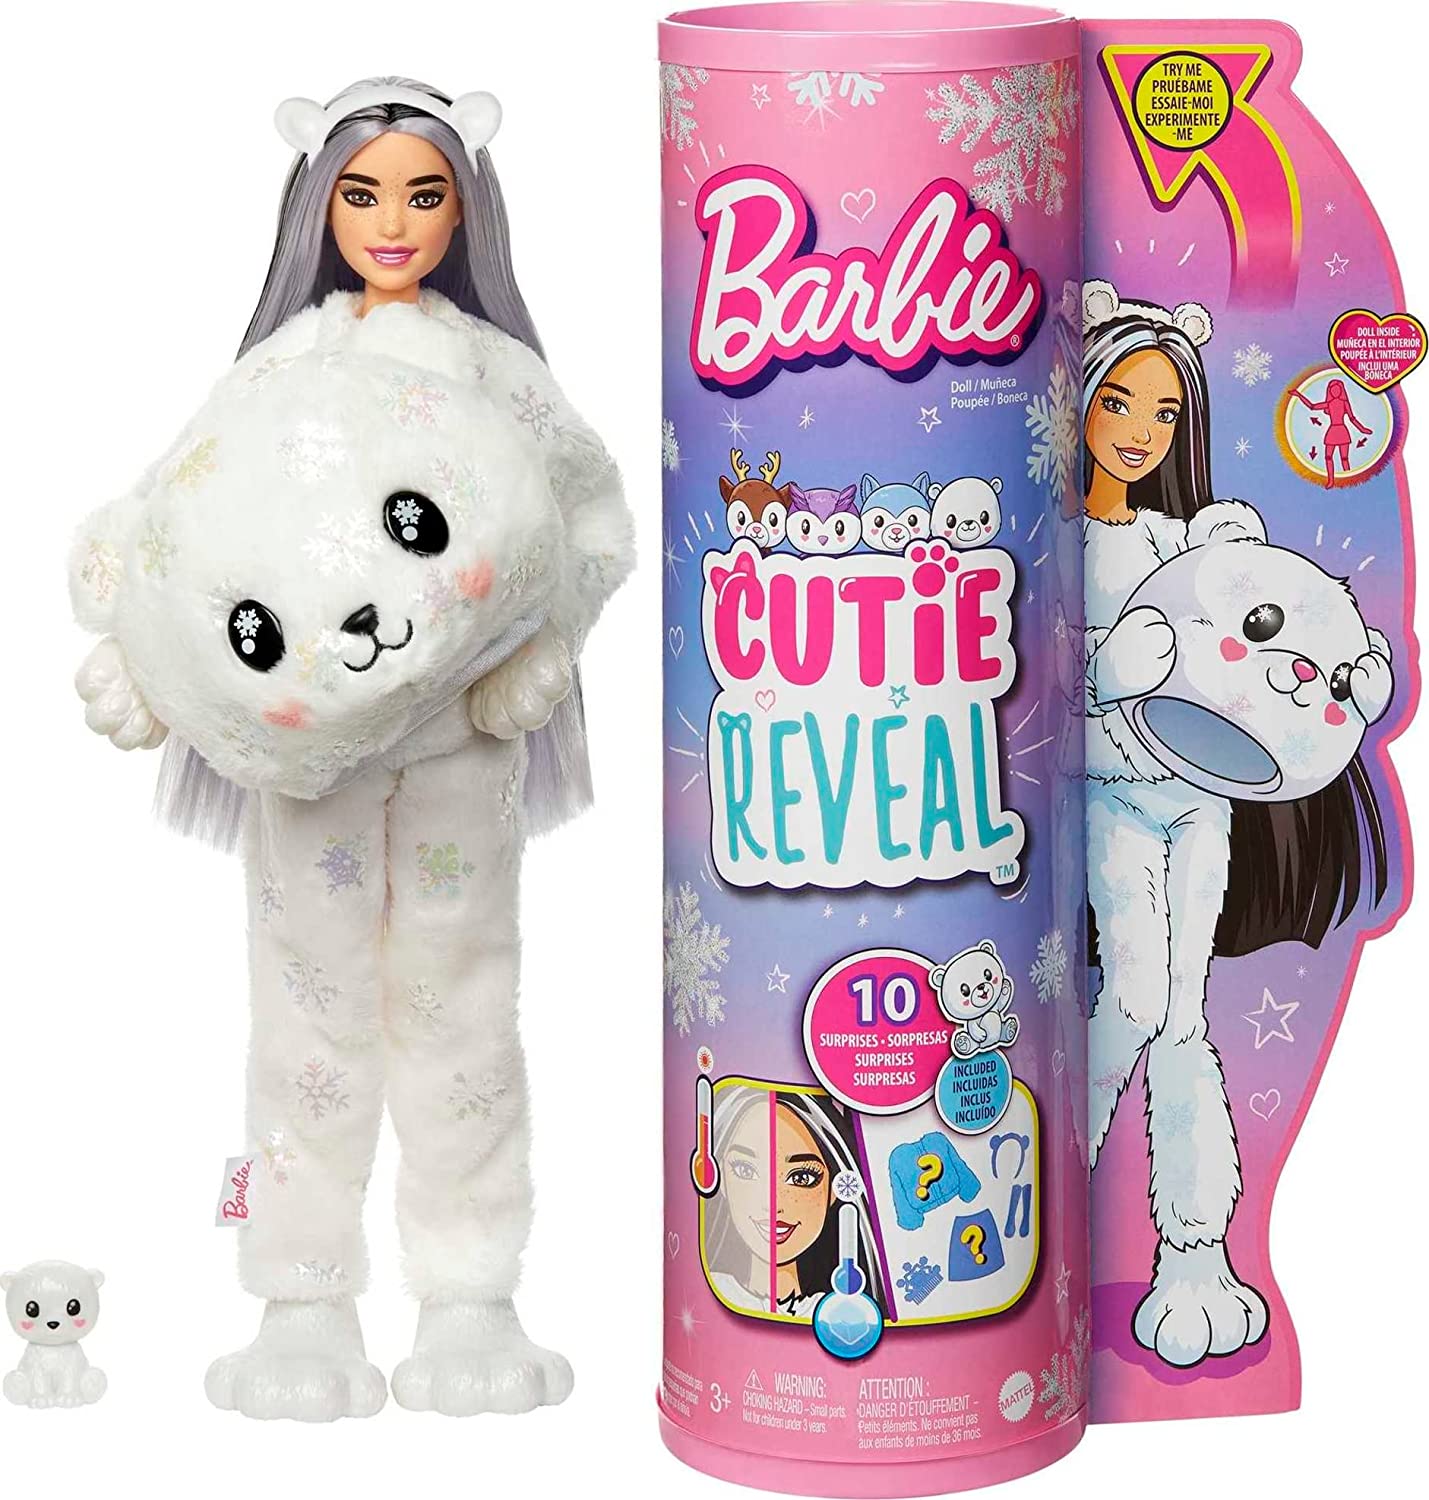 Barbie Doll, Cutie Reveal Bunny Plush Costume Doll with 10 Surprises, Mini Pet, Color Change and Accessories